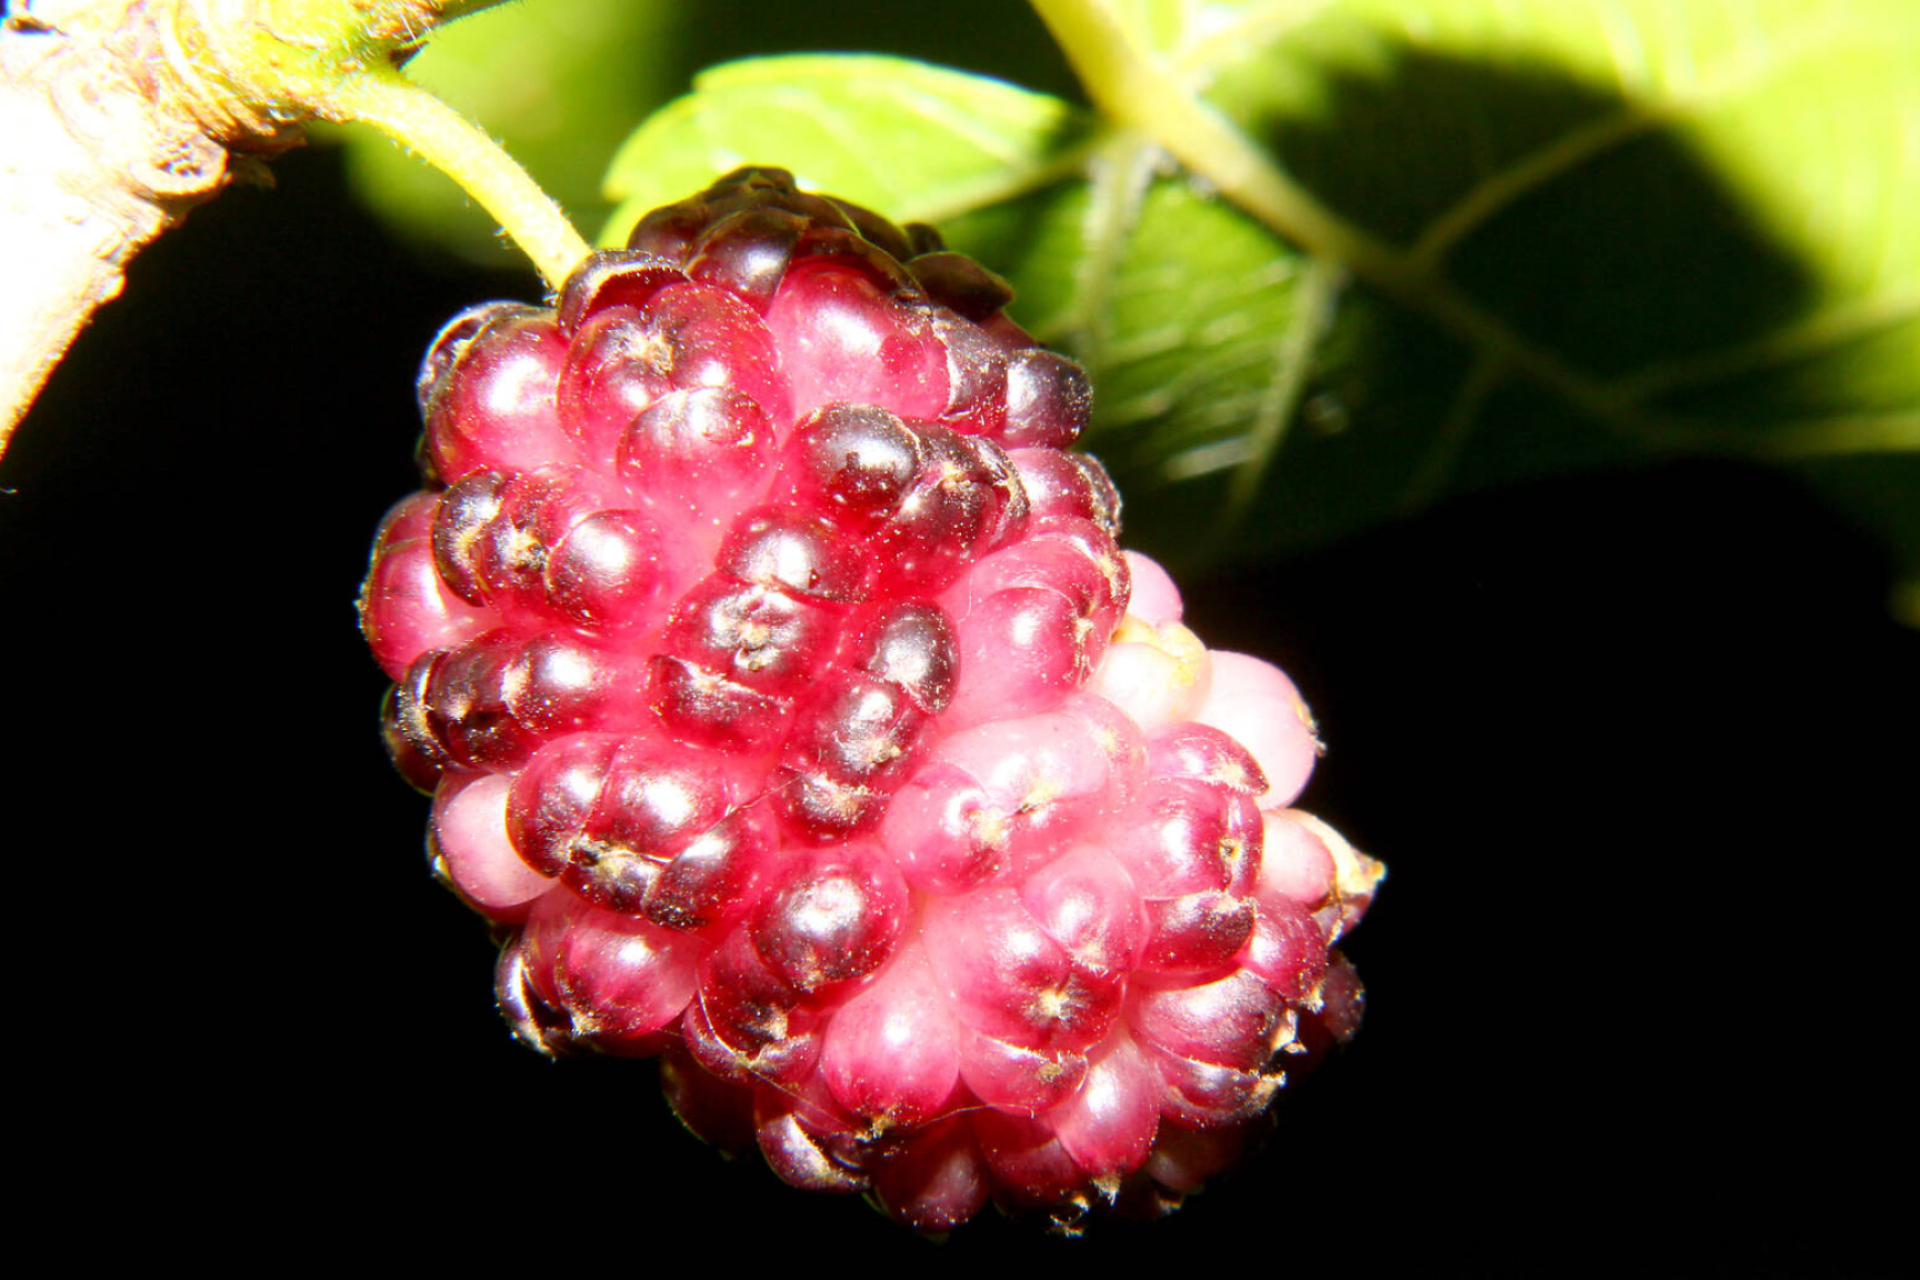 Berries image, Mulberry fruit, Fresh and juicy, Creative commons license, 1920x1280 HD Desktop